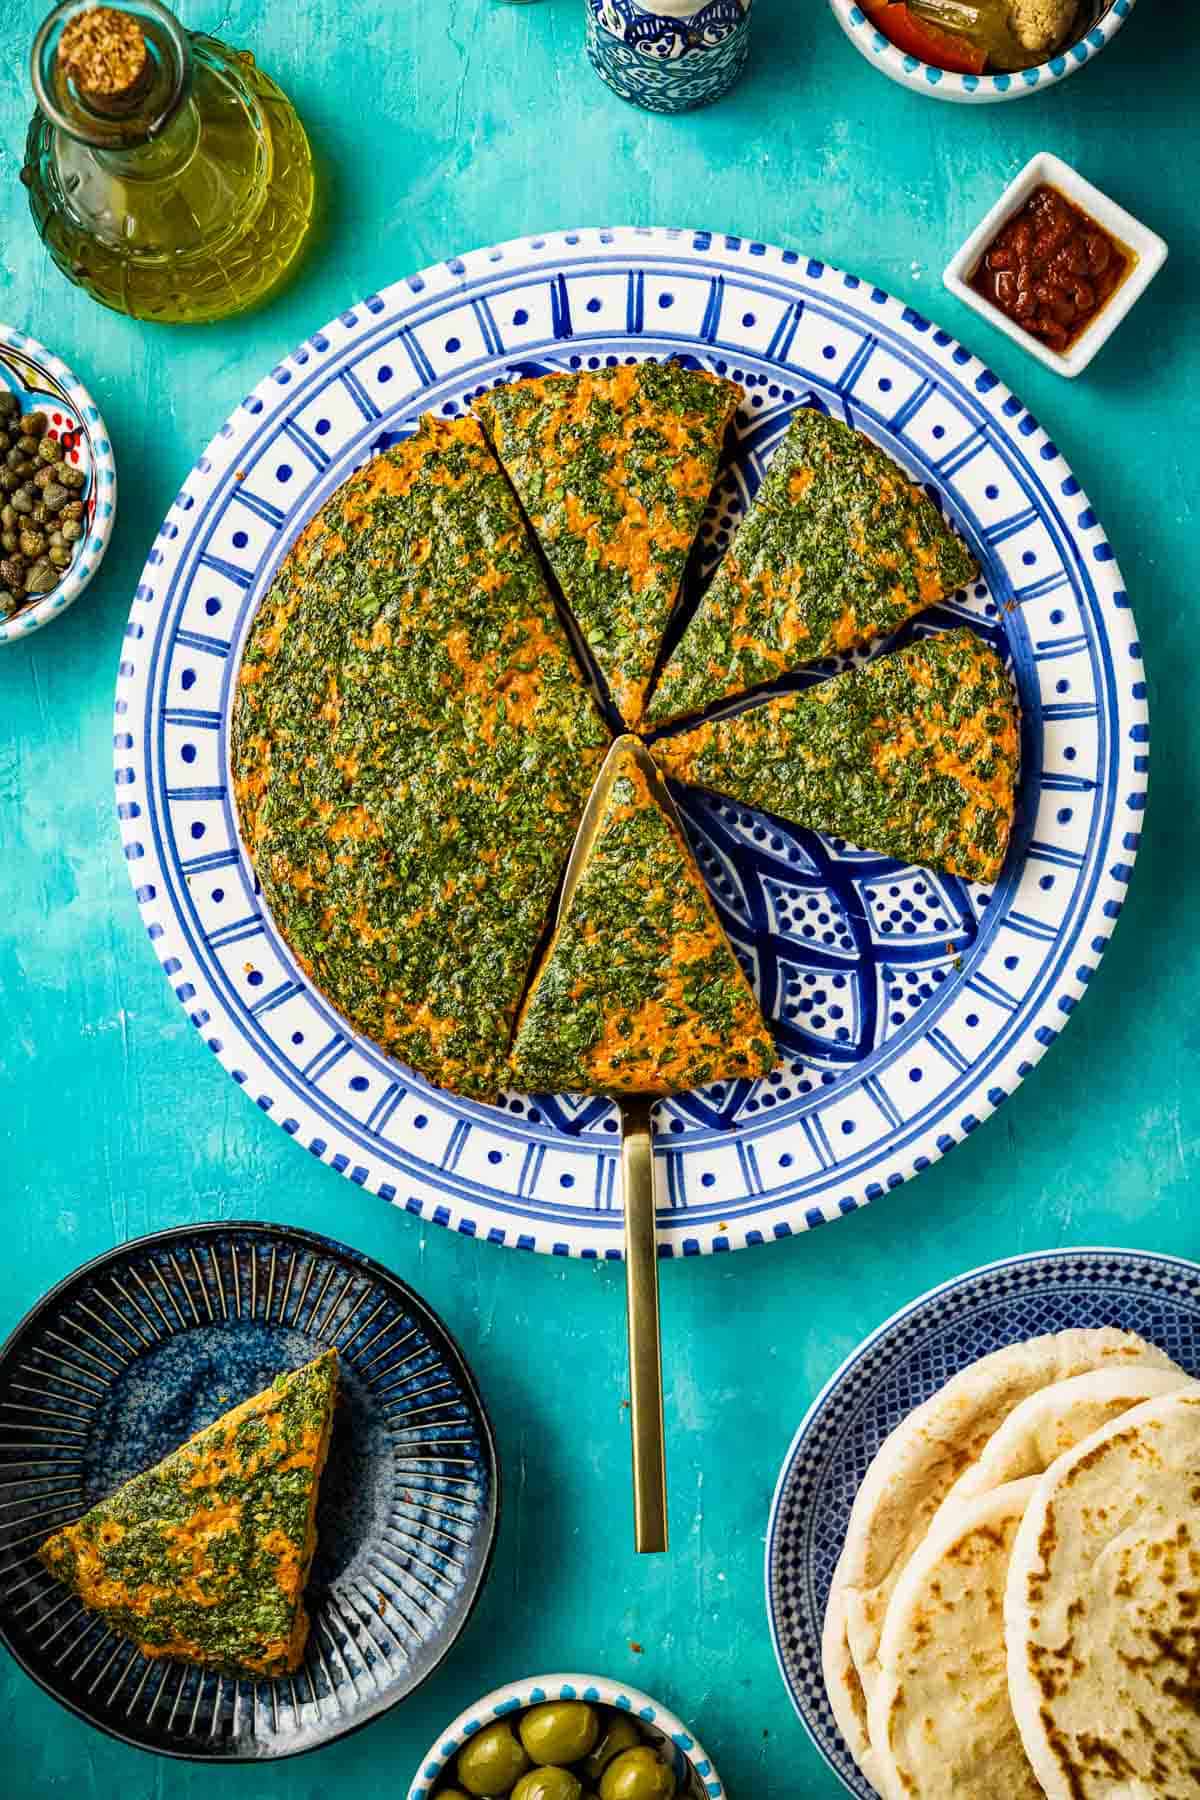 Tunisian style baked frittata with carrot cut into slices on a serving platter with a serving utensil. This is surrounded by a slice of the frittata on a plate, some pita bread, olive oil, and small bowls of harissa, capers and green olives.